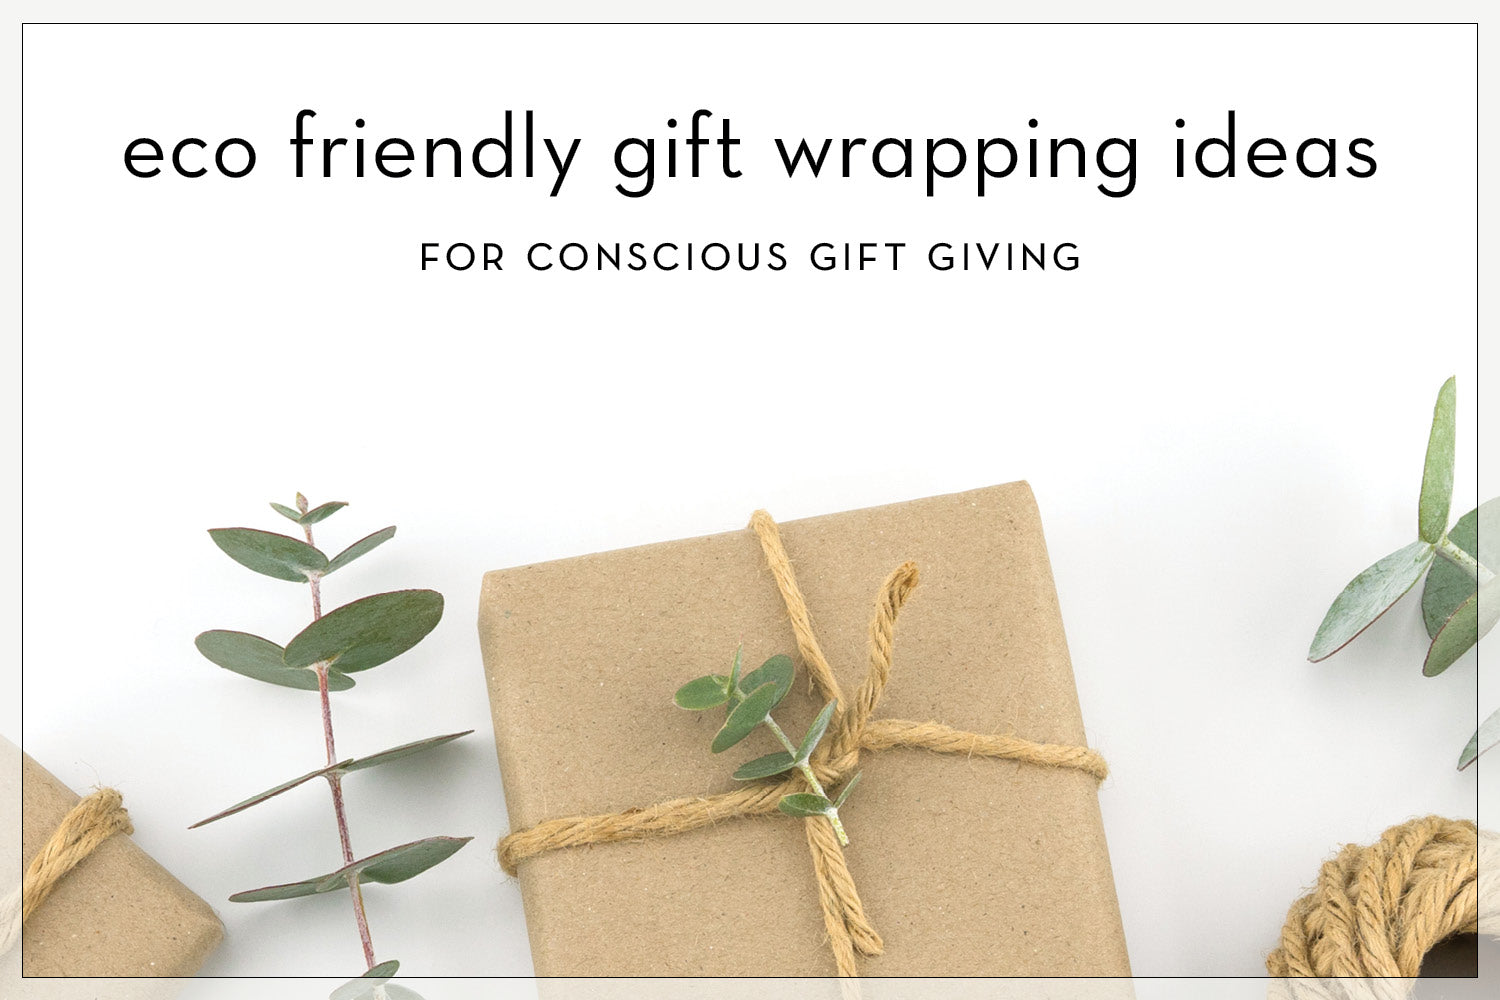 eco friendly gift wrapping ideas for conscious gift giving